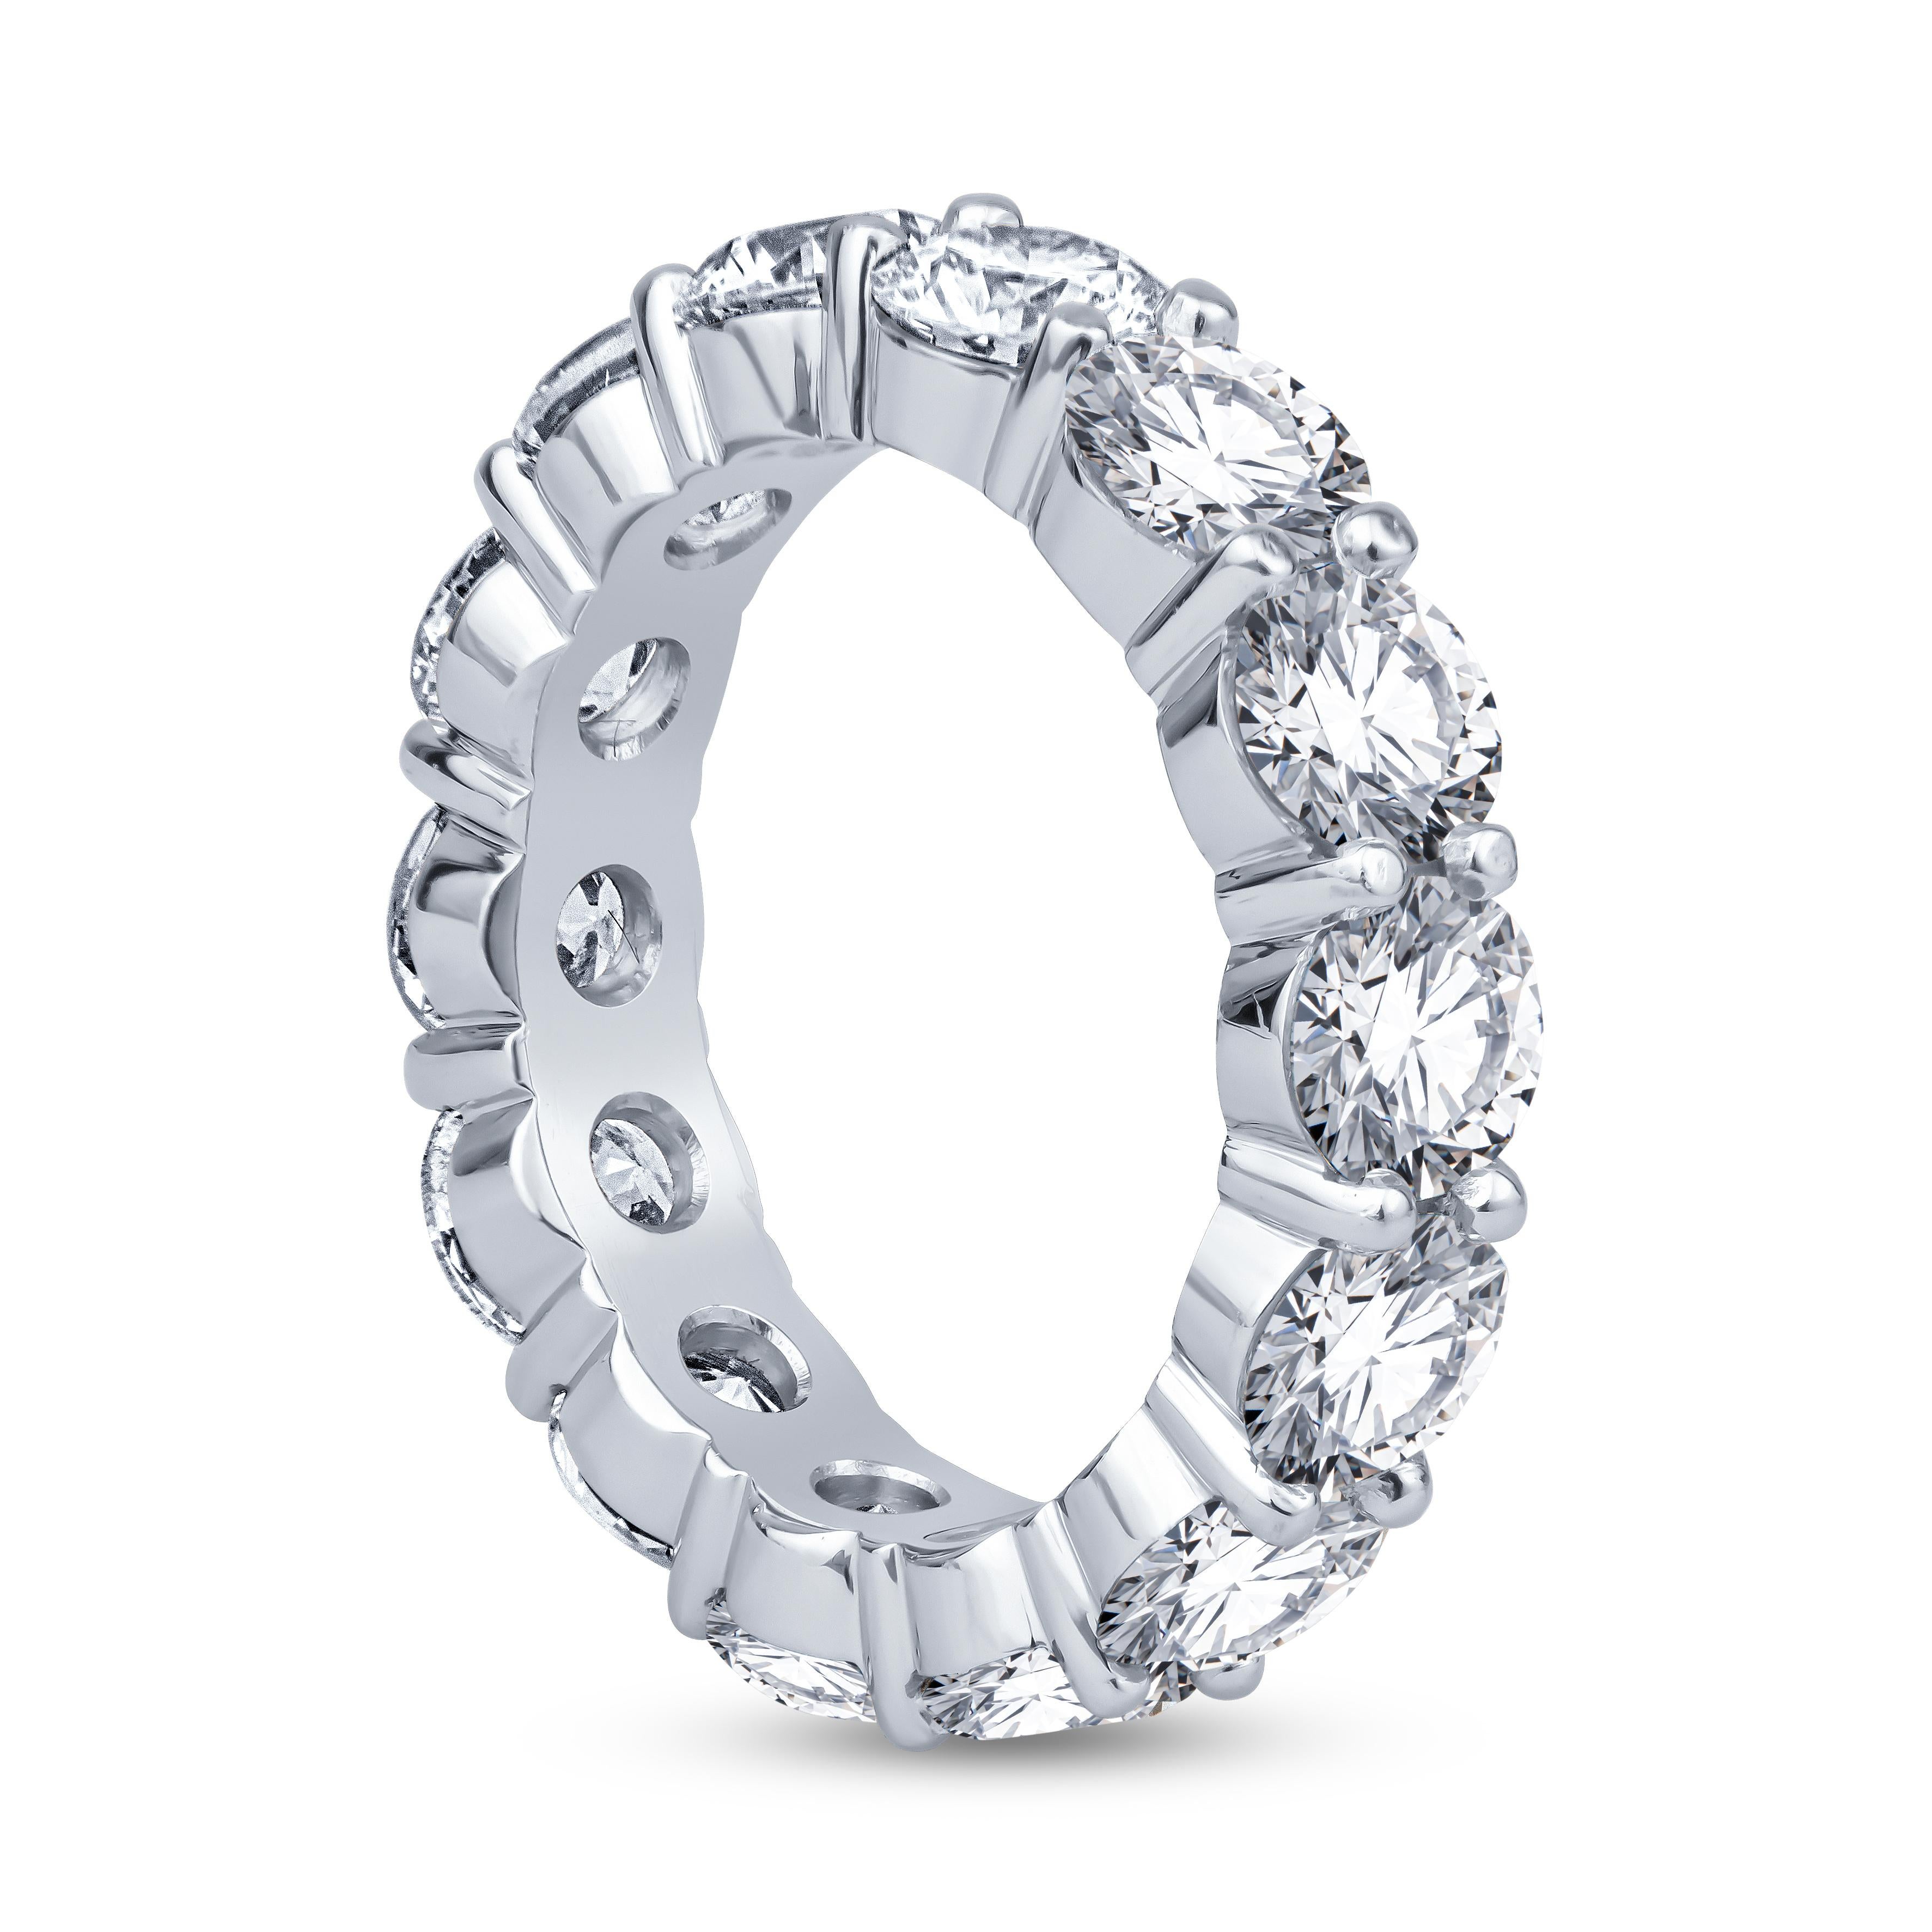 This stunning eternity band features 5.90ct total weight in round brilliant cut, H VS quality diamonds set in a platinum, low profile, shared prong setting. The ring itself is a size 6, and perfect for stacking/layering or wear on its own. Contact